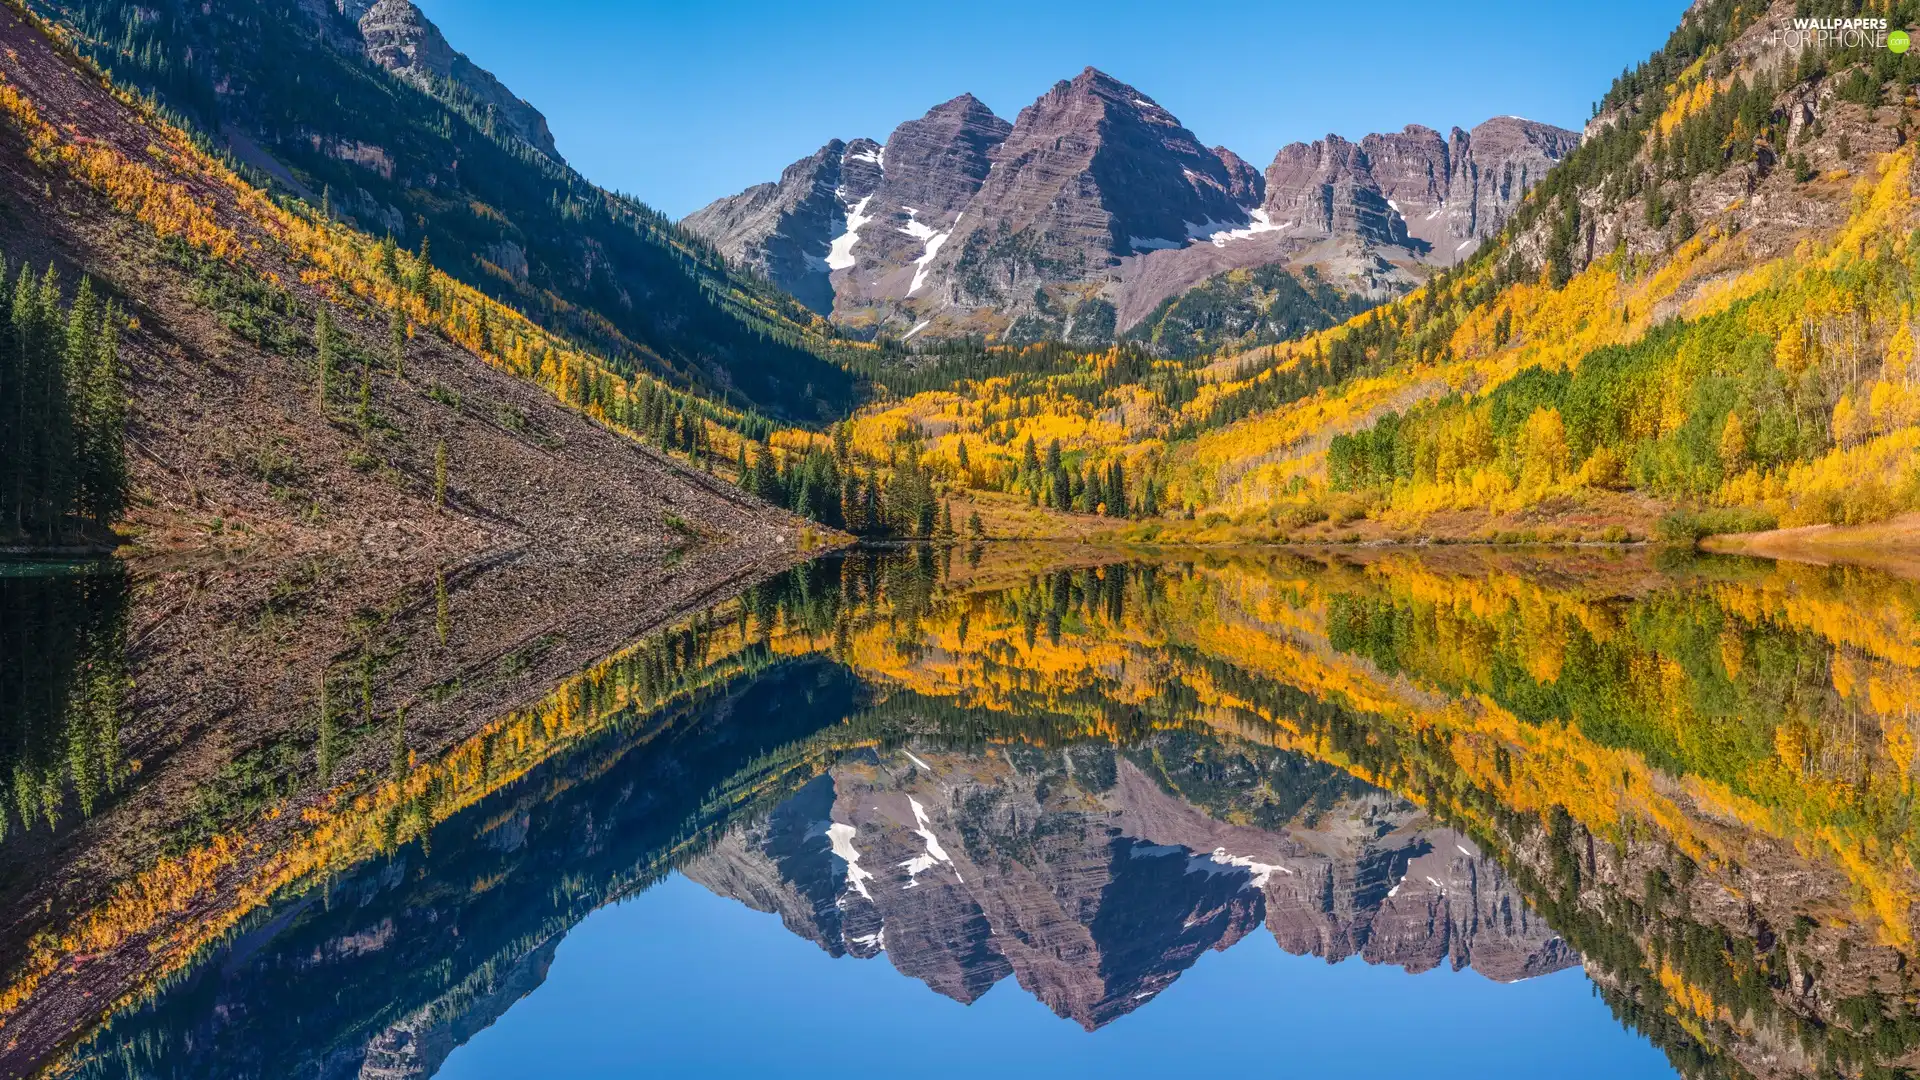 Maroon Lake, autumn, The United States, trees, State of Colorado, Maroon Bells Peaks, rocky mountains, viewes